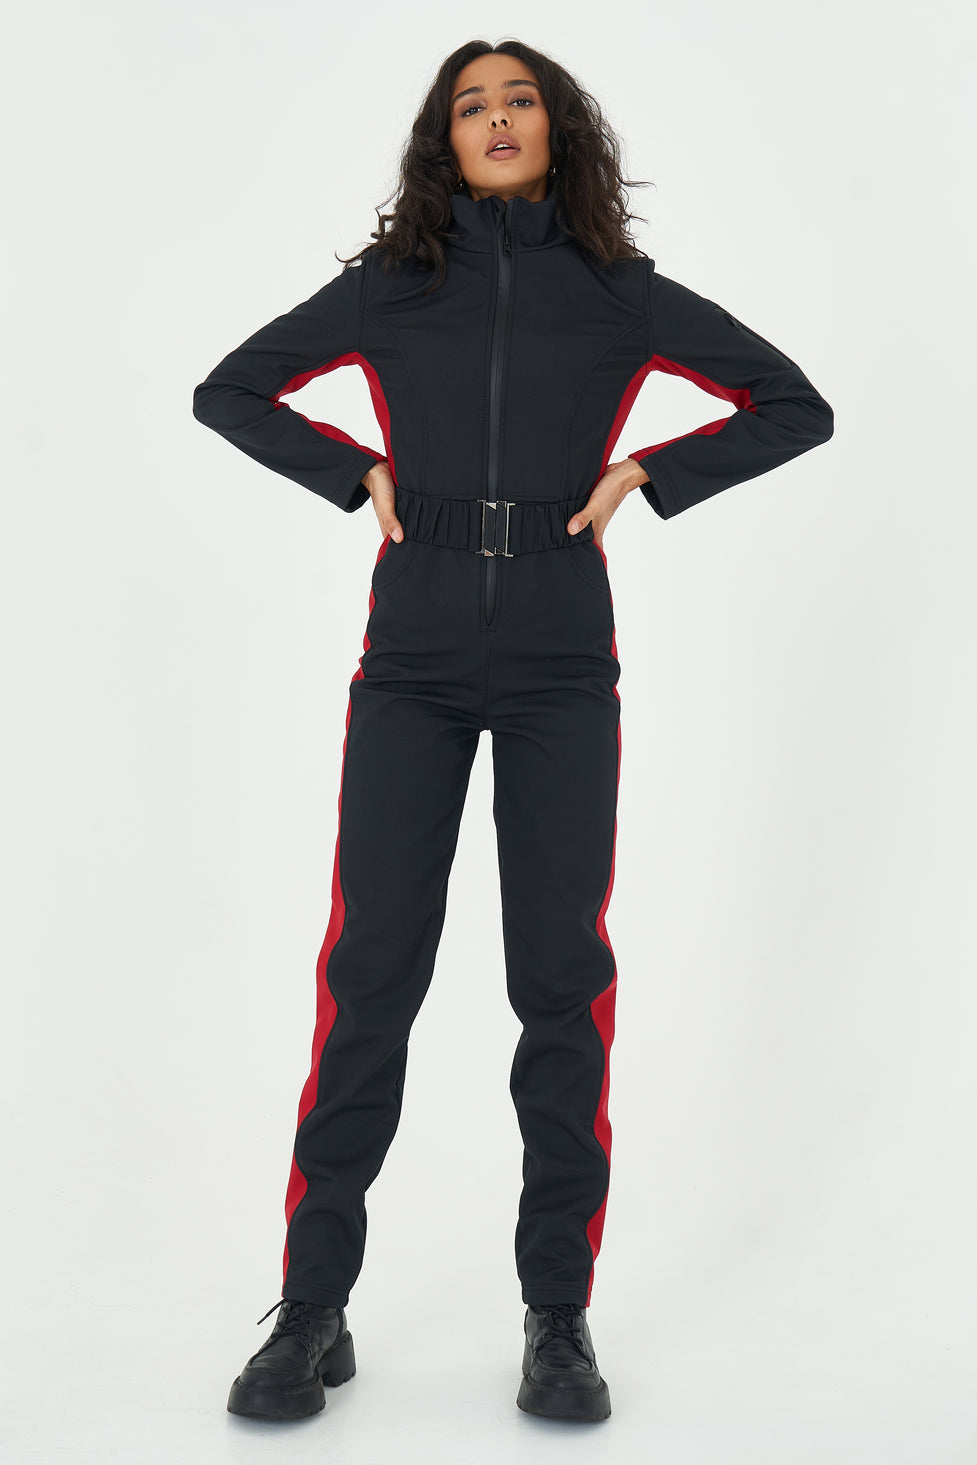 Base layers for skiing women's - Navy blue two piece set for winter - Best  thermals for women